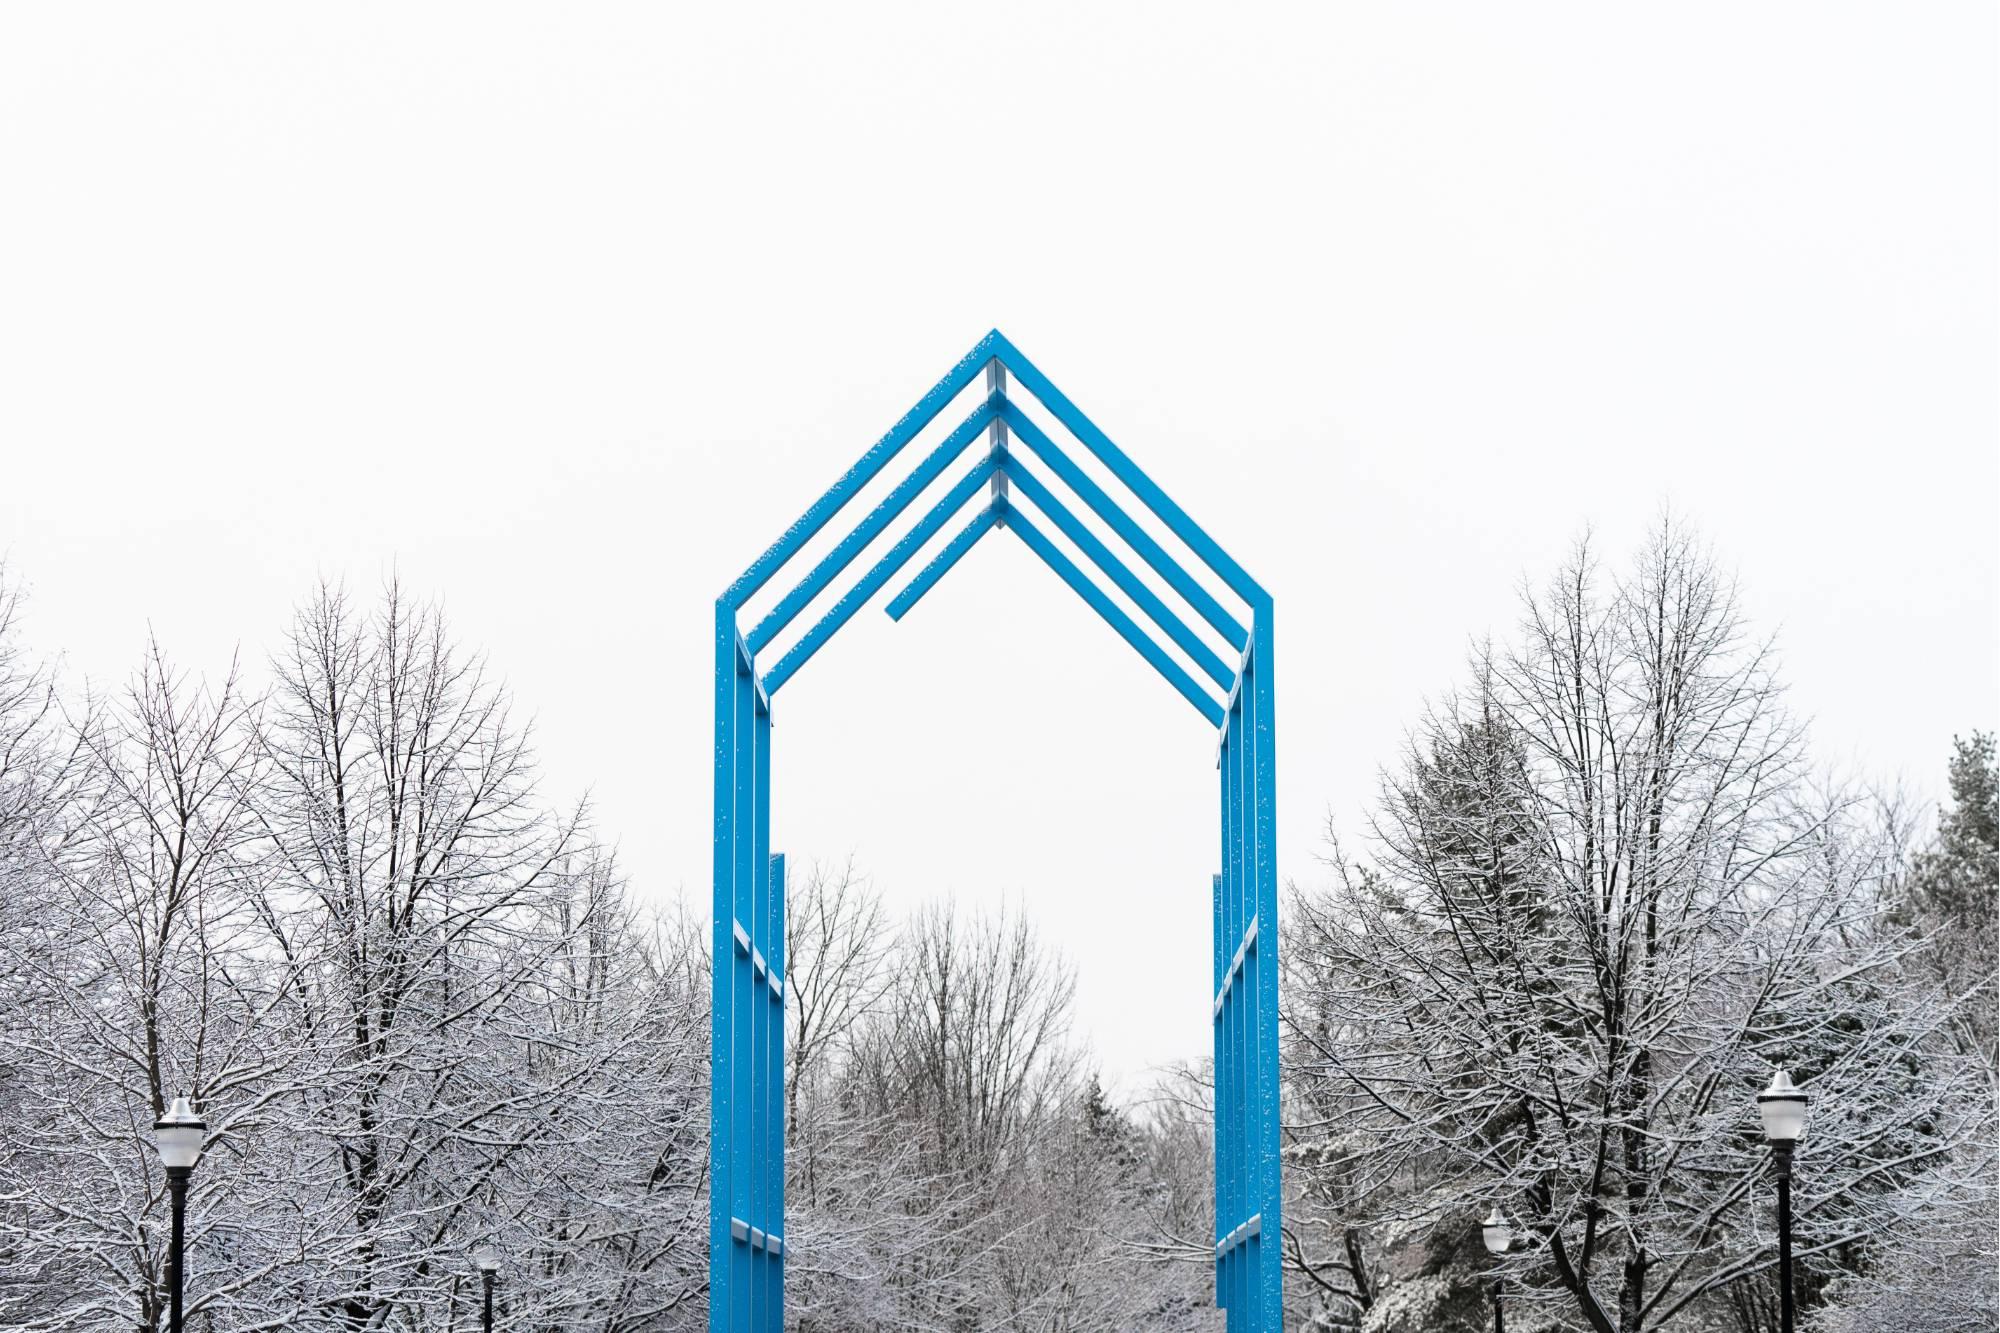 The blue Transformational Link on GVSU's Allendale Campus in the winter with snow on the ground